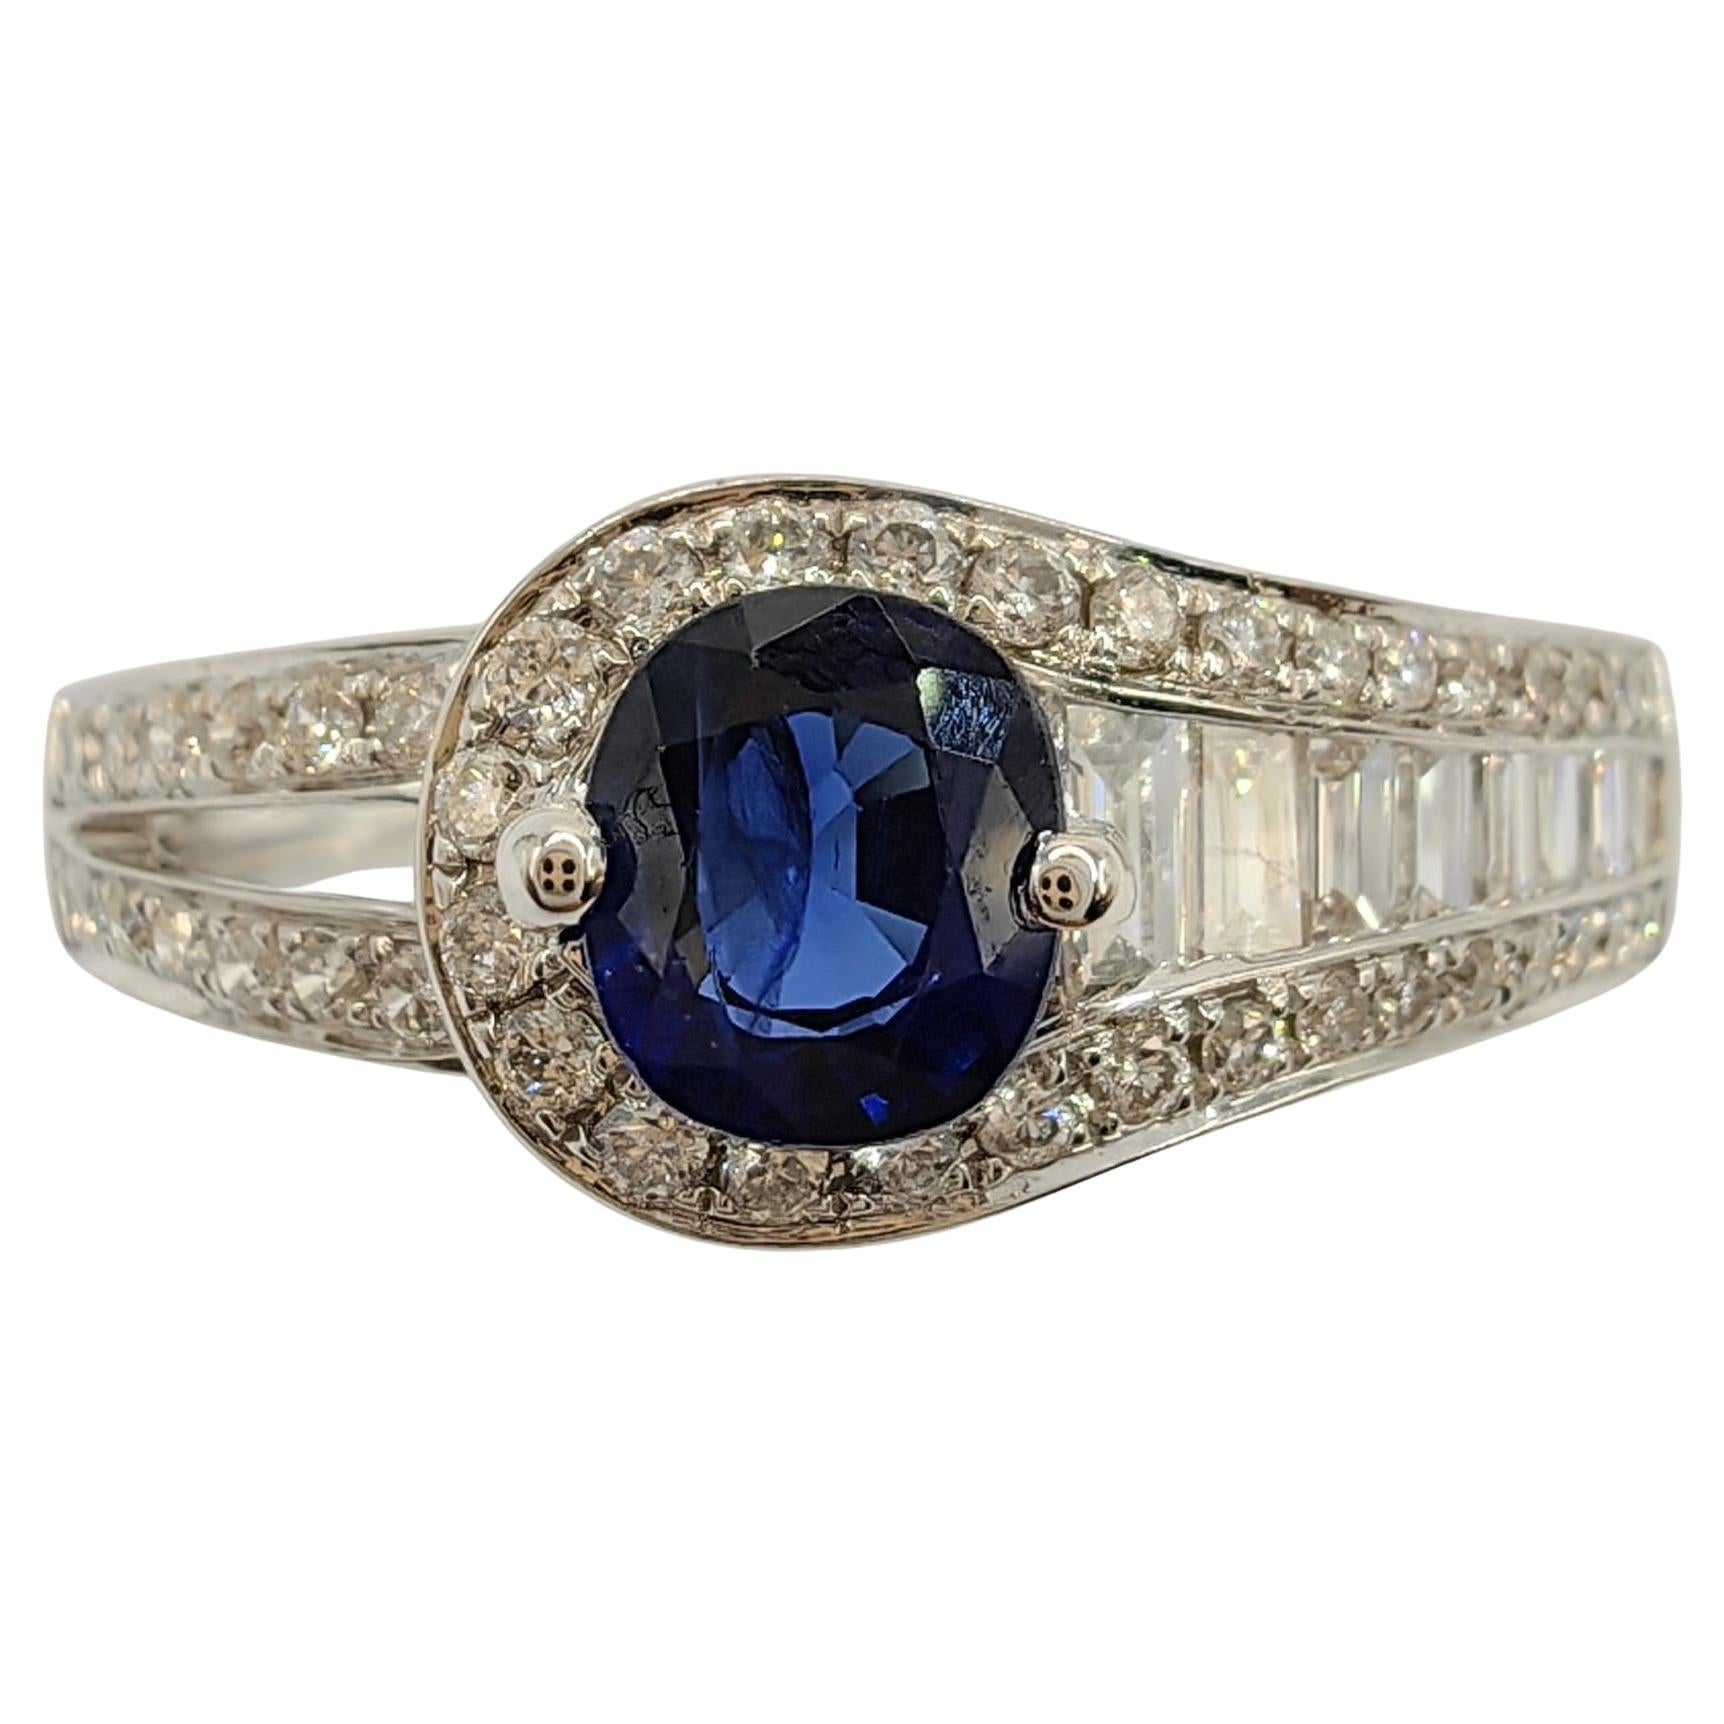 Oval-Cut Blue Sapphire Tapered Baguette Diamond Ring in 18k White Gold